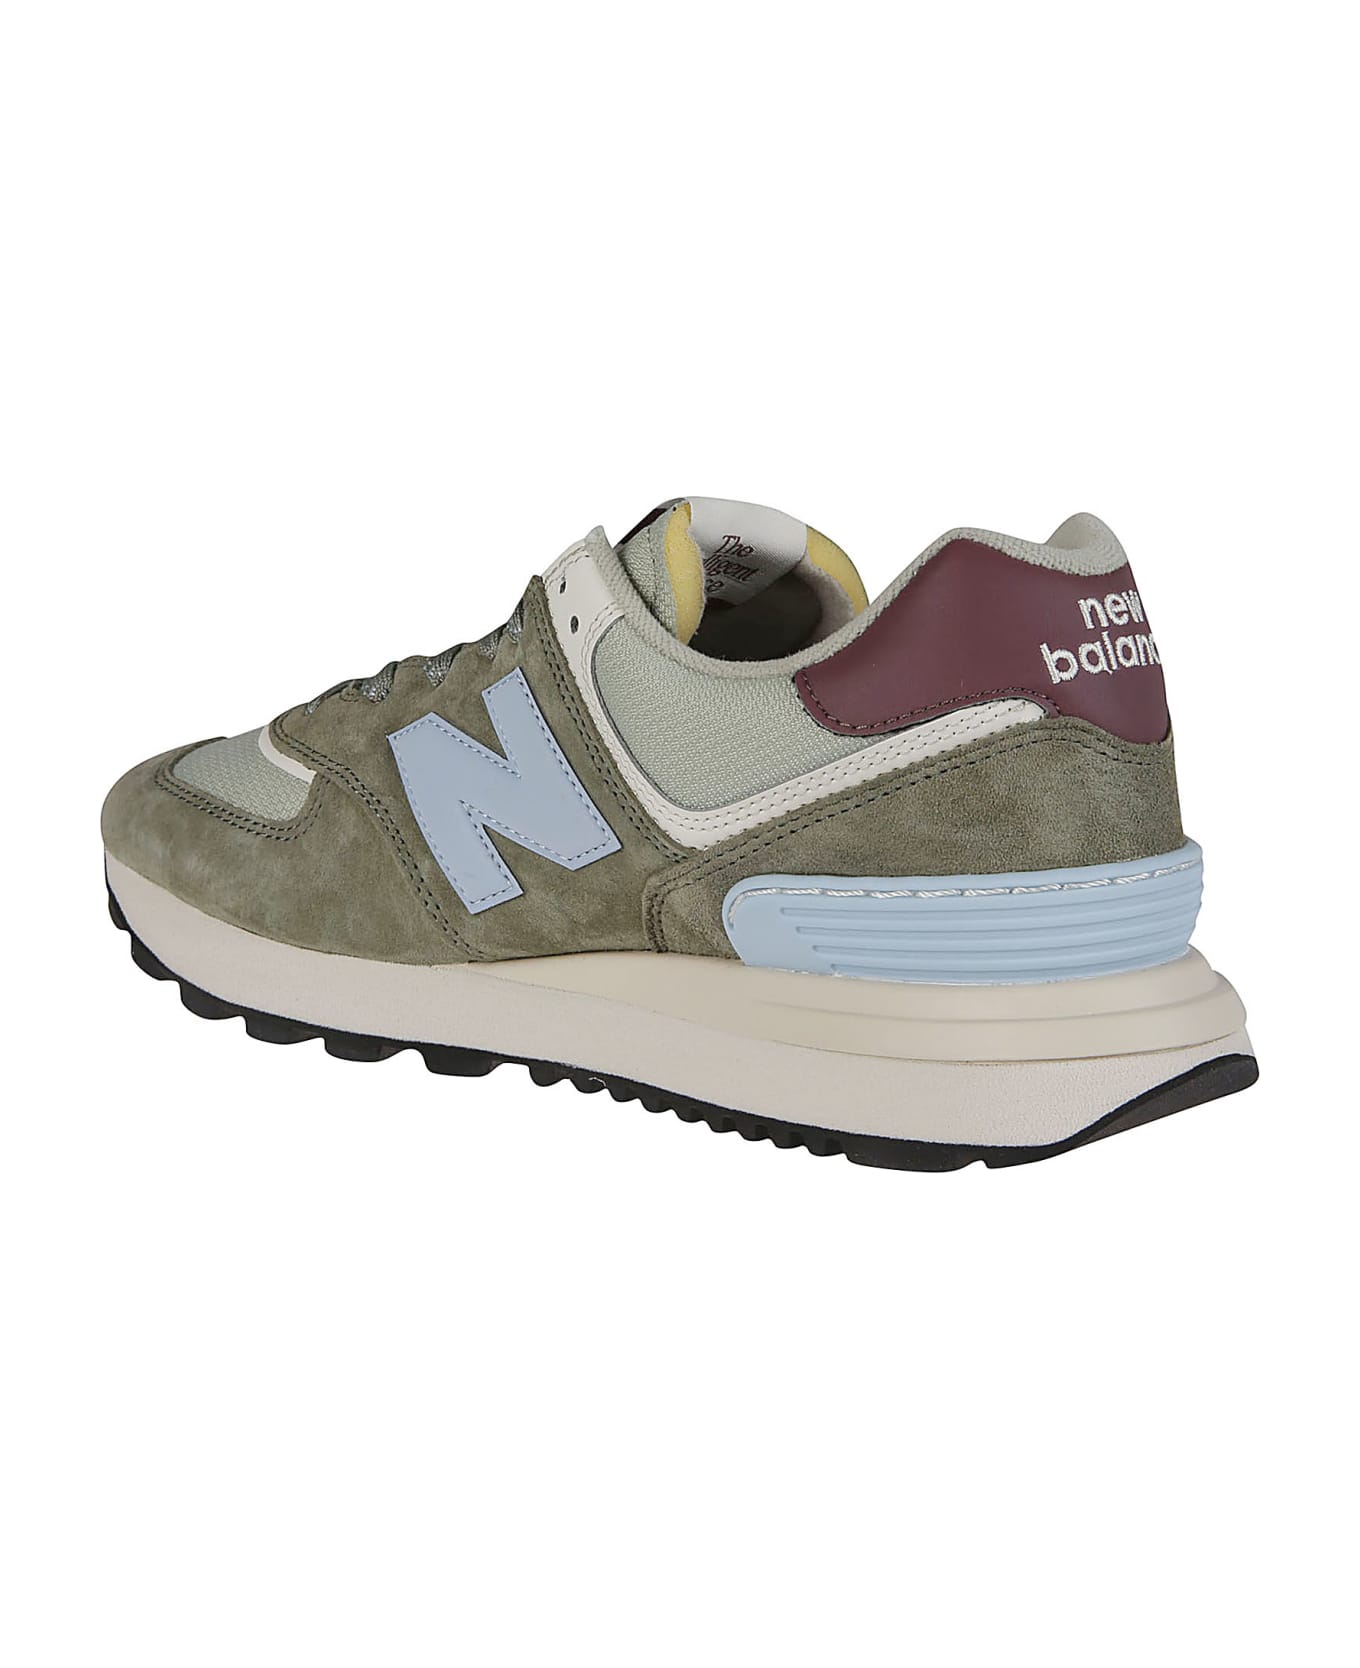 New Balance 574 Sneakers - GREEN